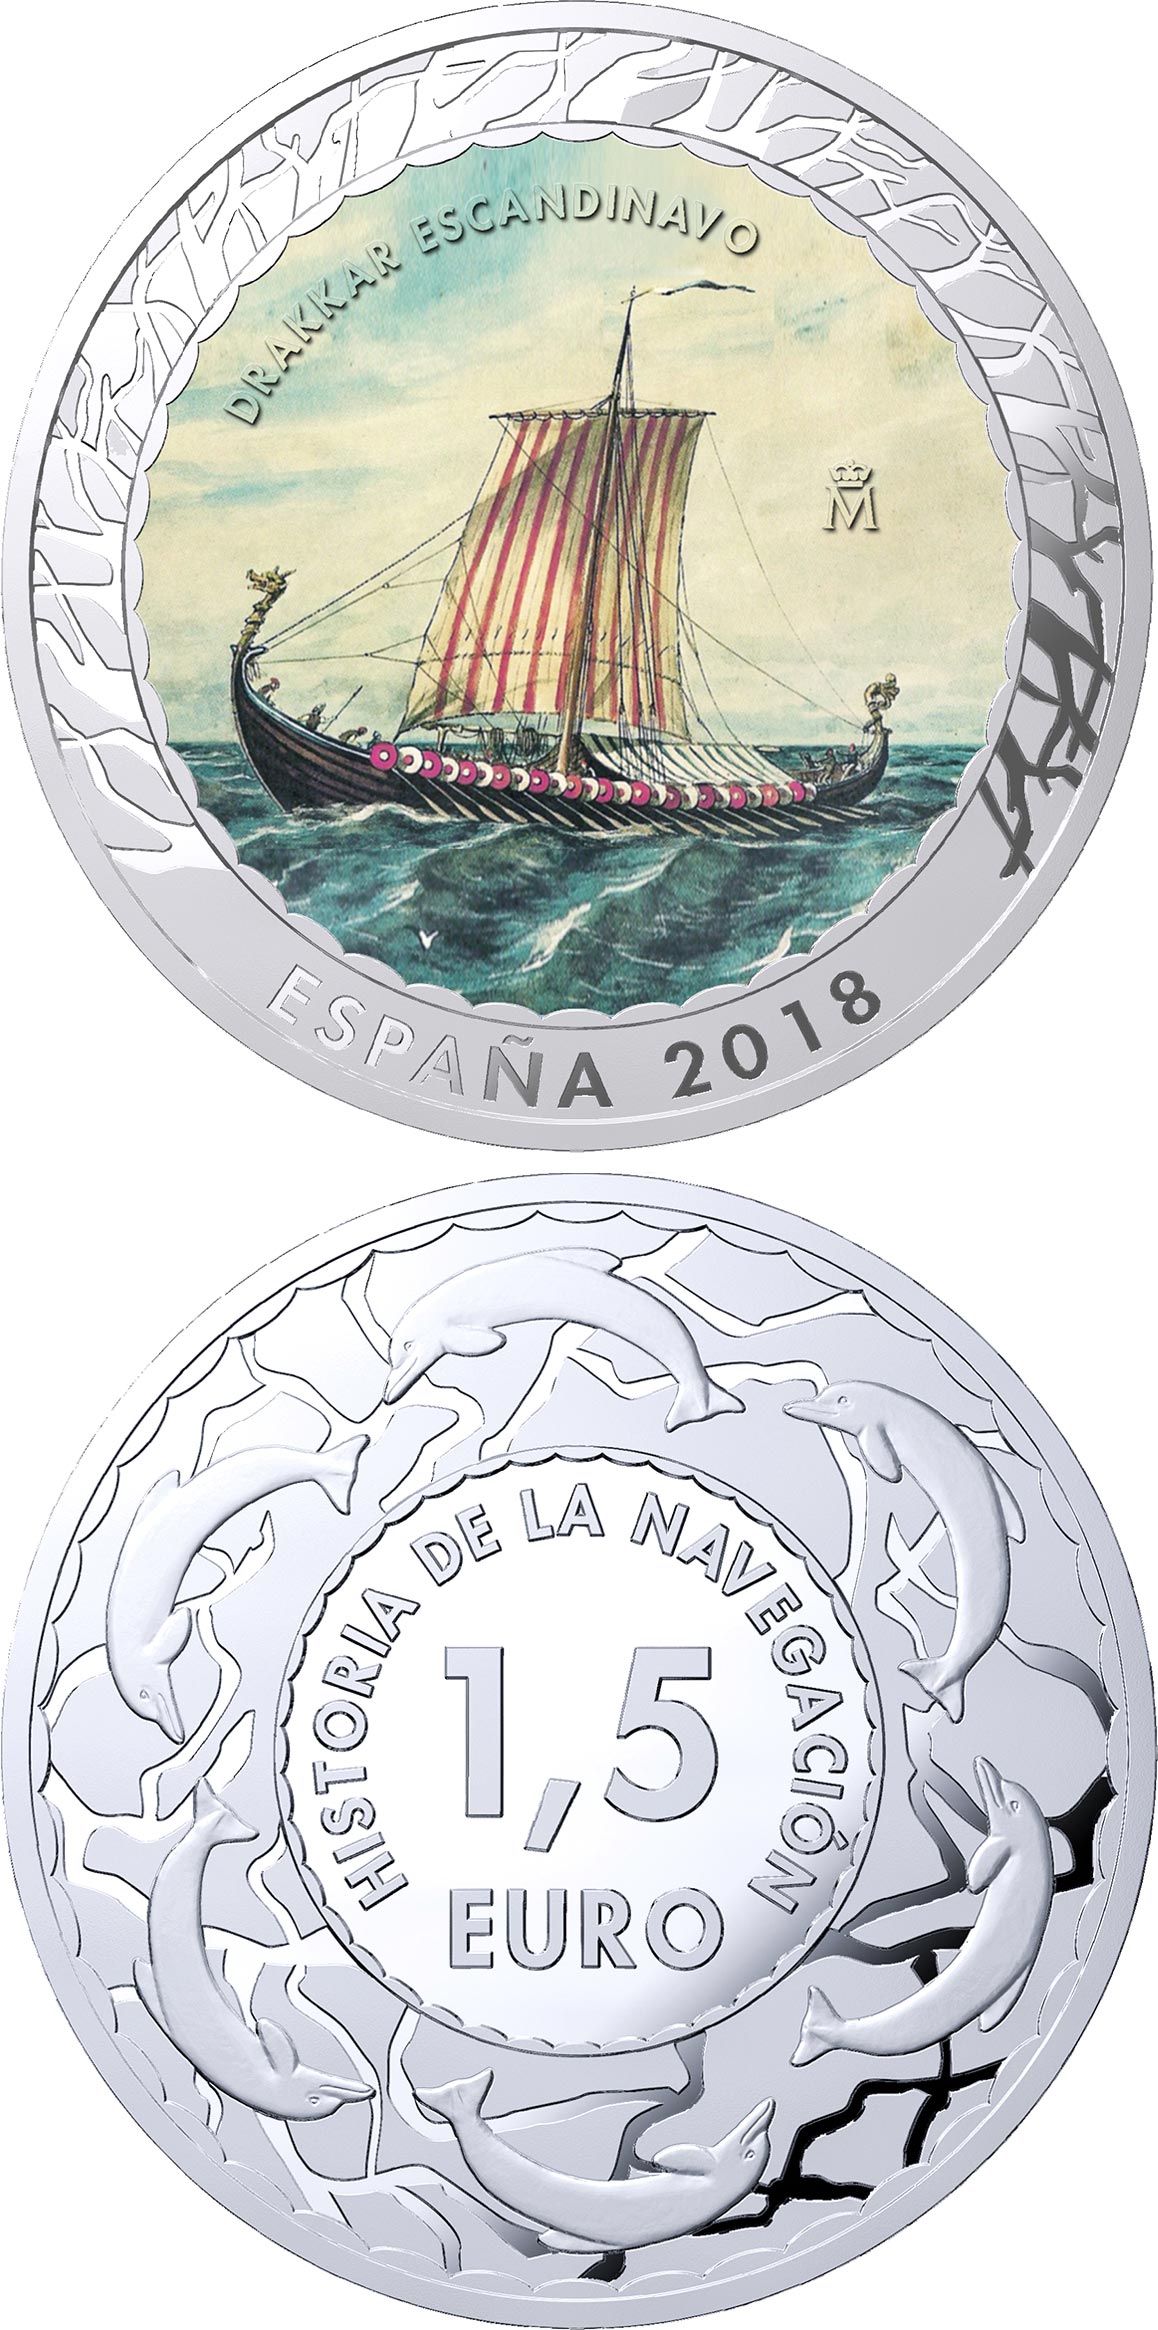 Image of 1.5 euro coin - Scandinavian Drakkar | Spain 2018.  The Copper–Nickel (CuNi) coin is of BU quality.